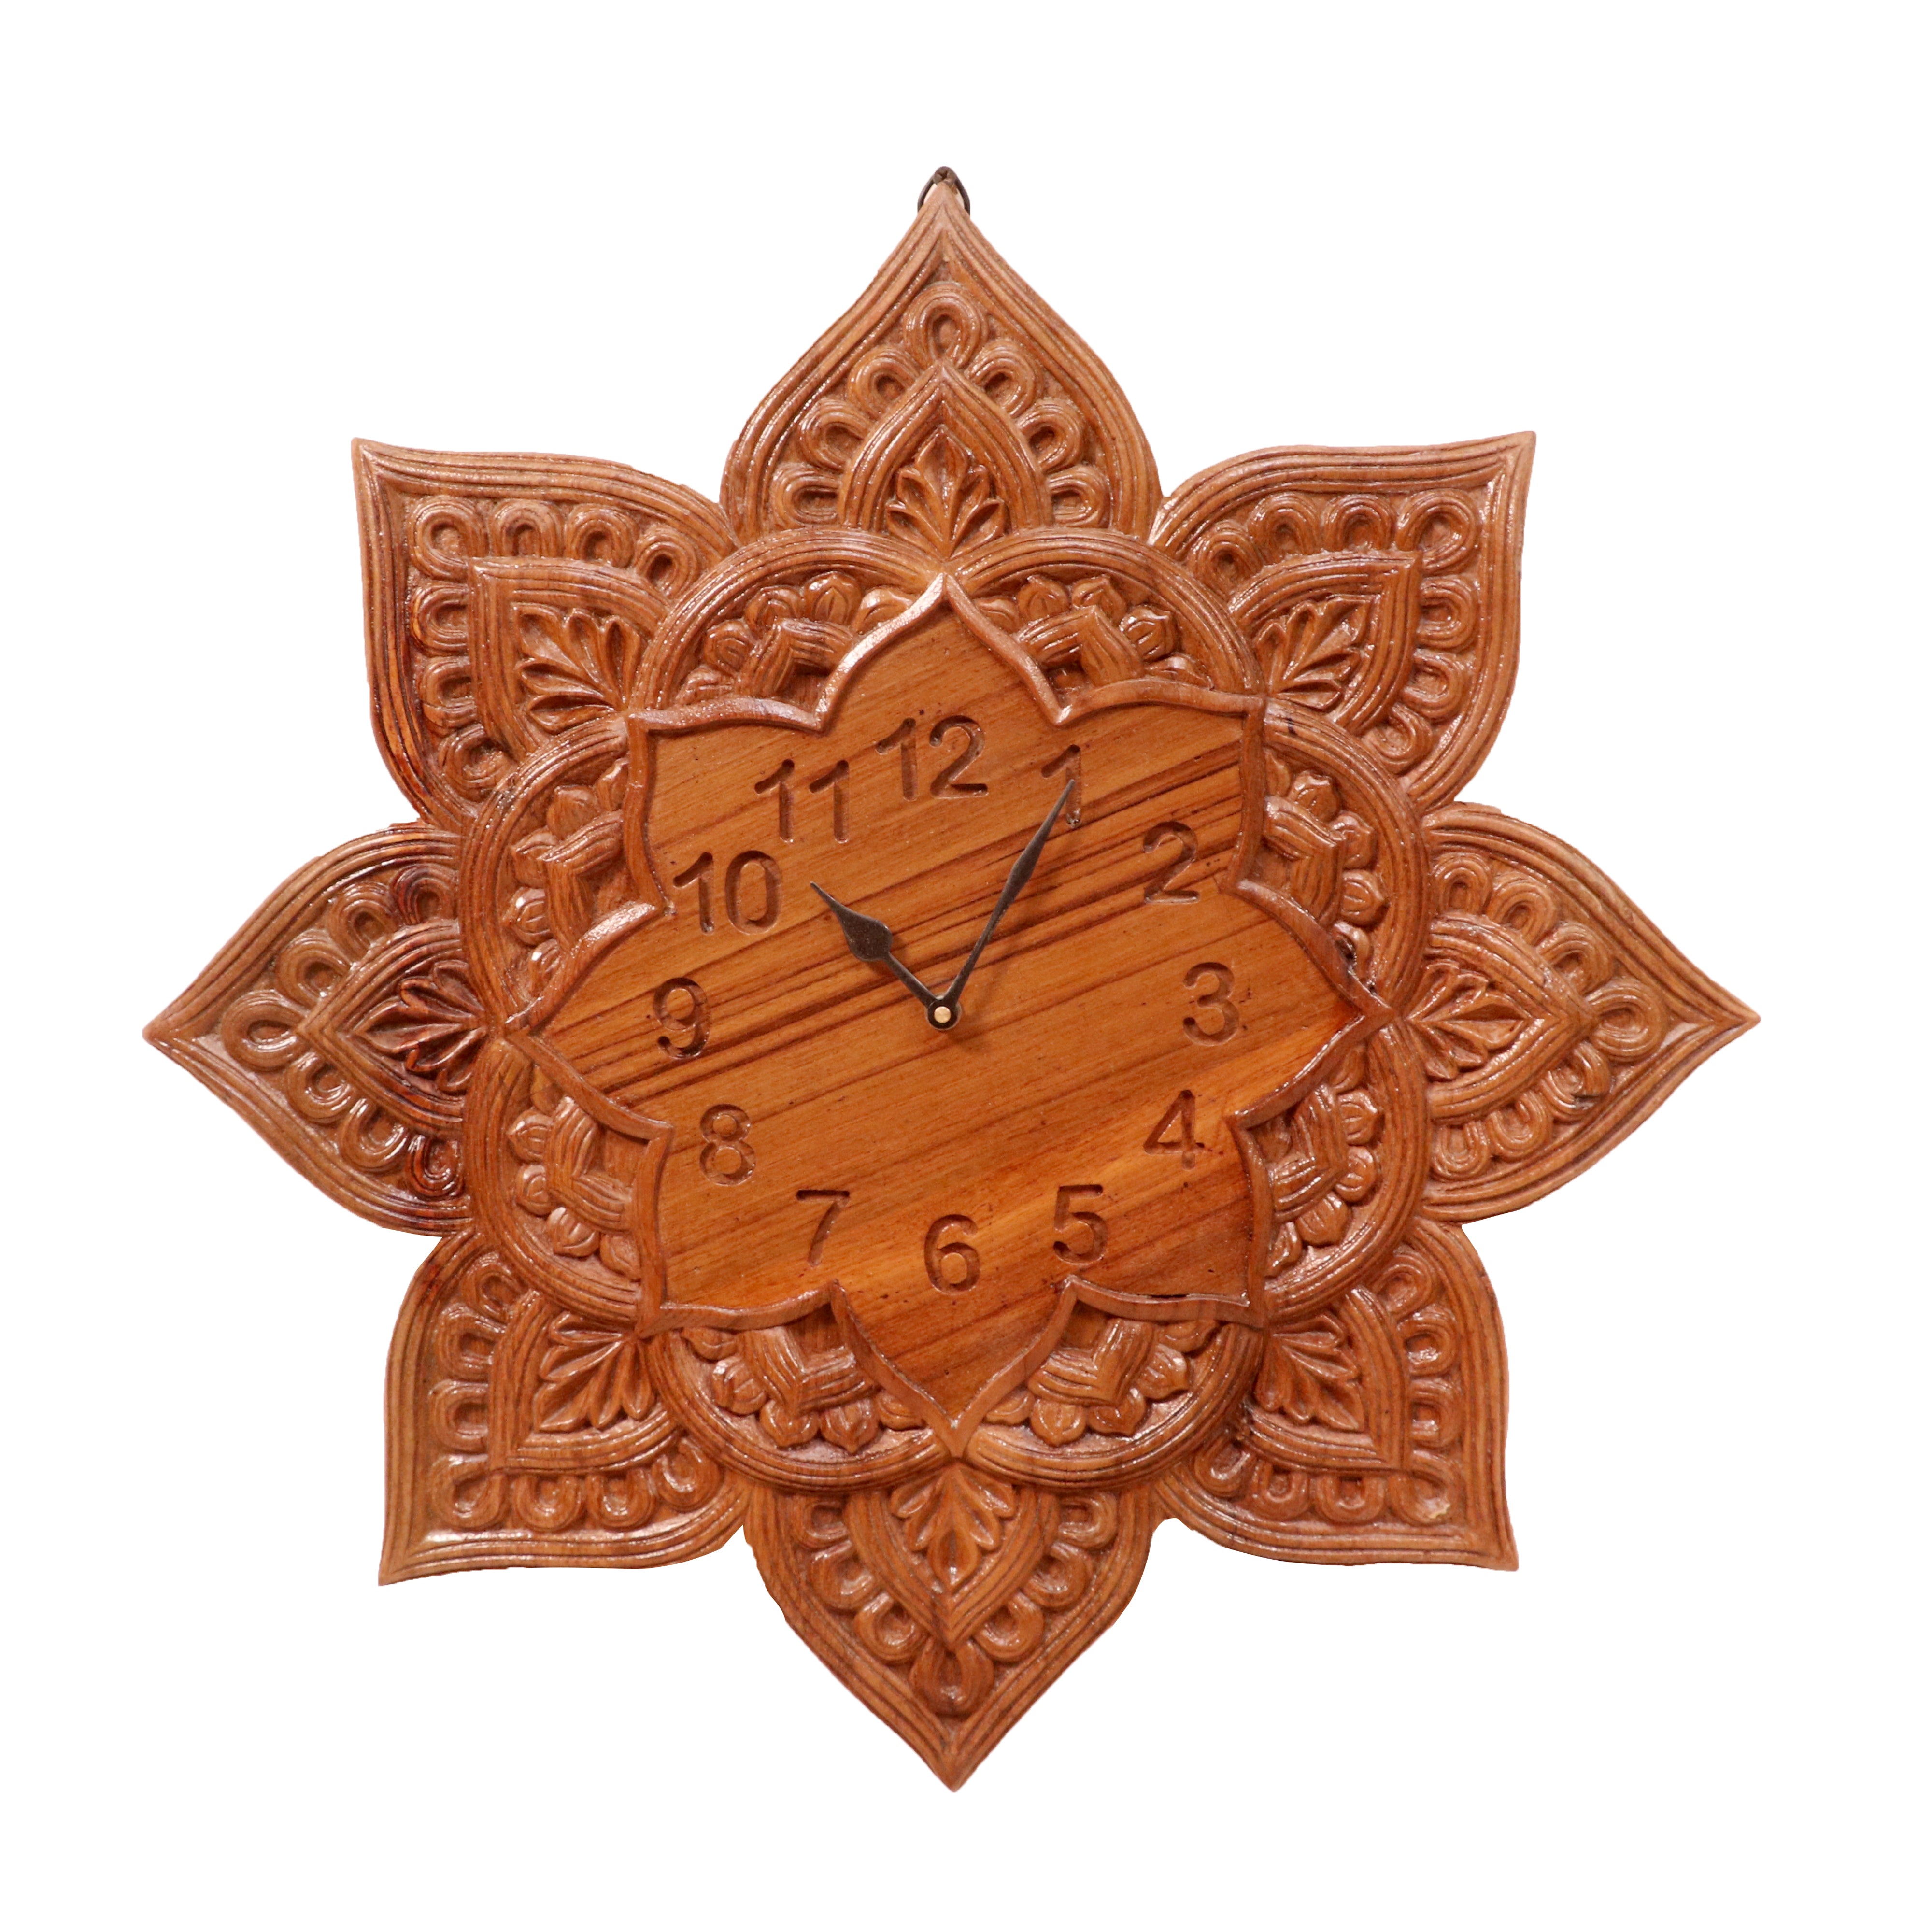 Ophitic Carved Flowered Style Handmade Wooden Wall Clock for Home Clock